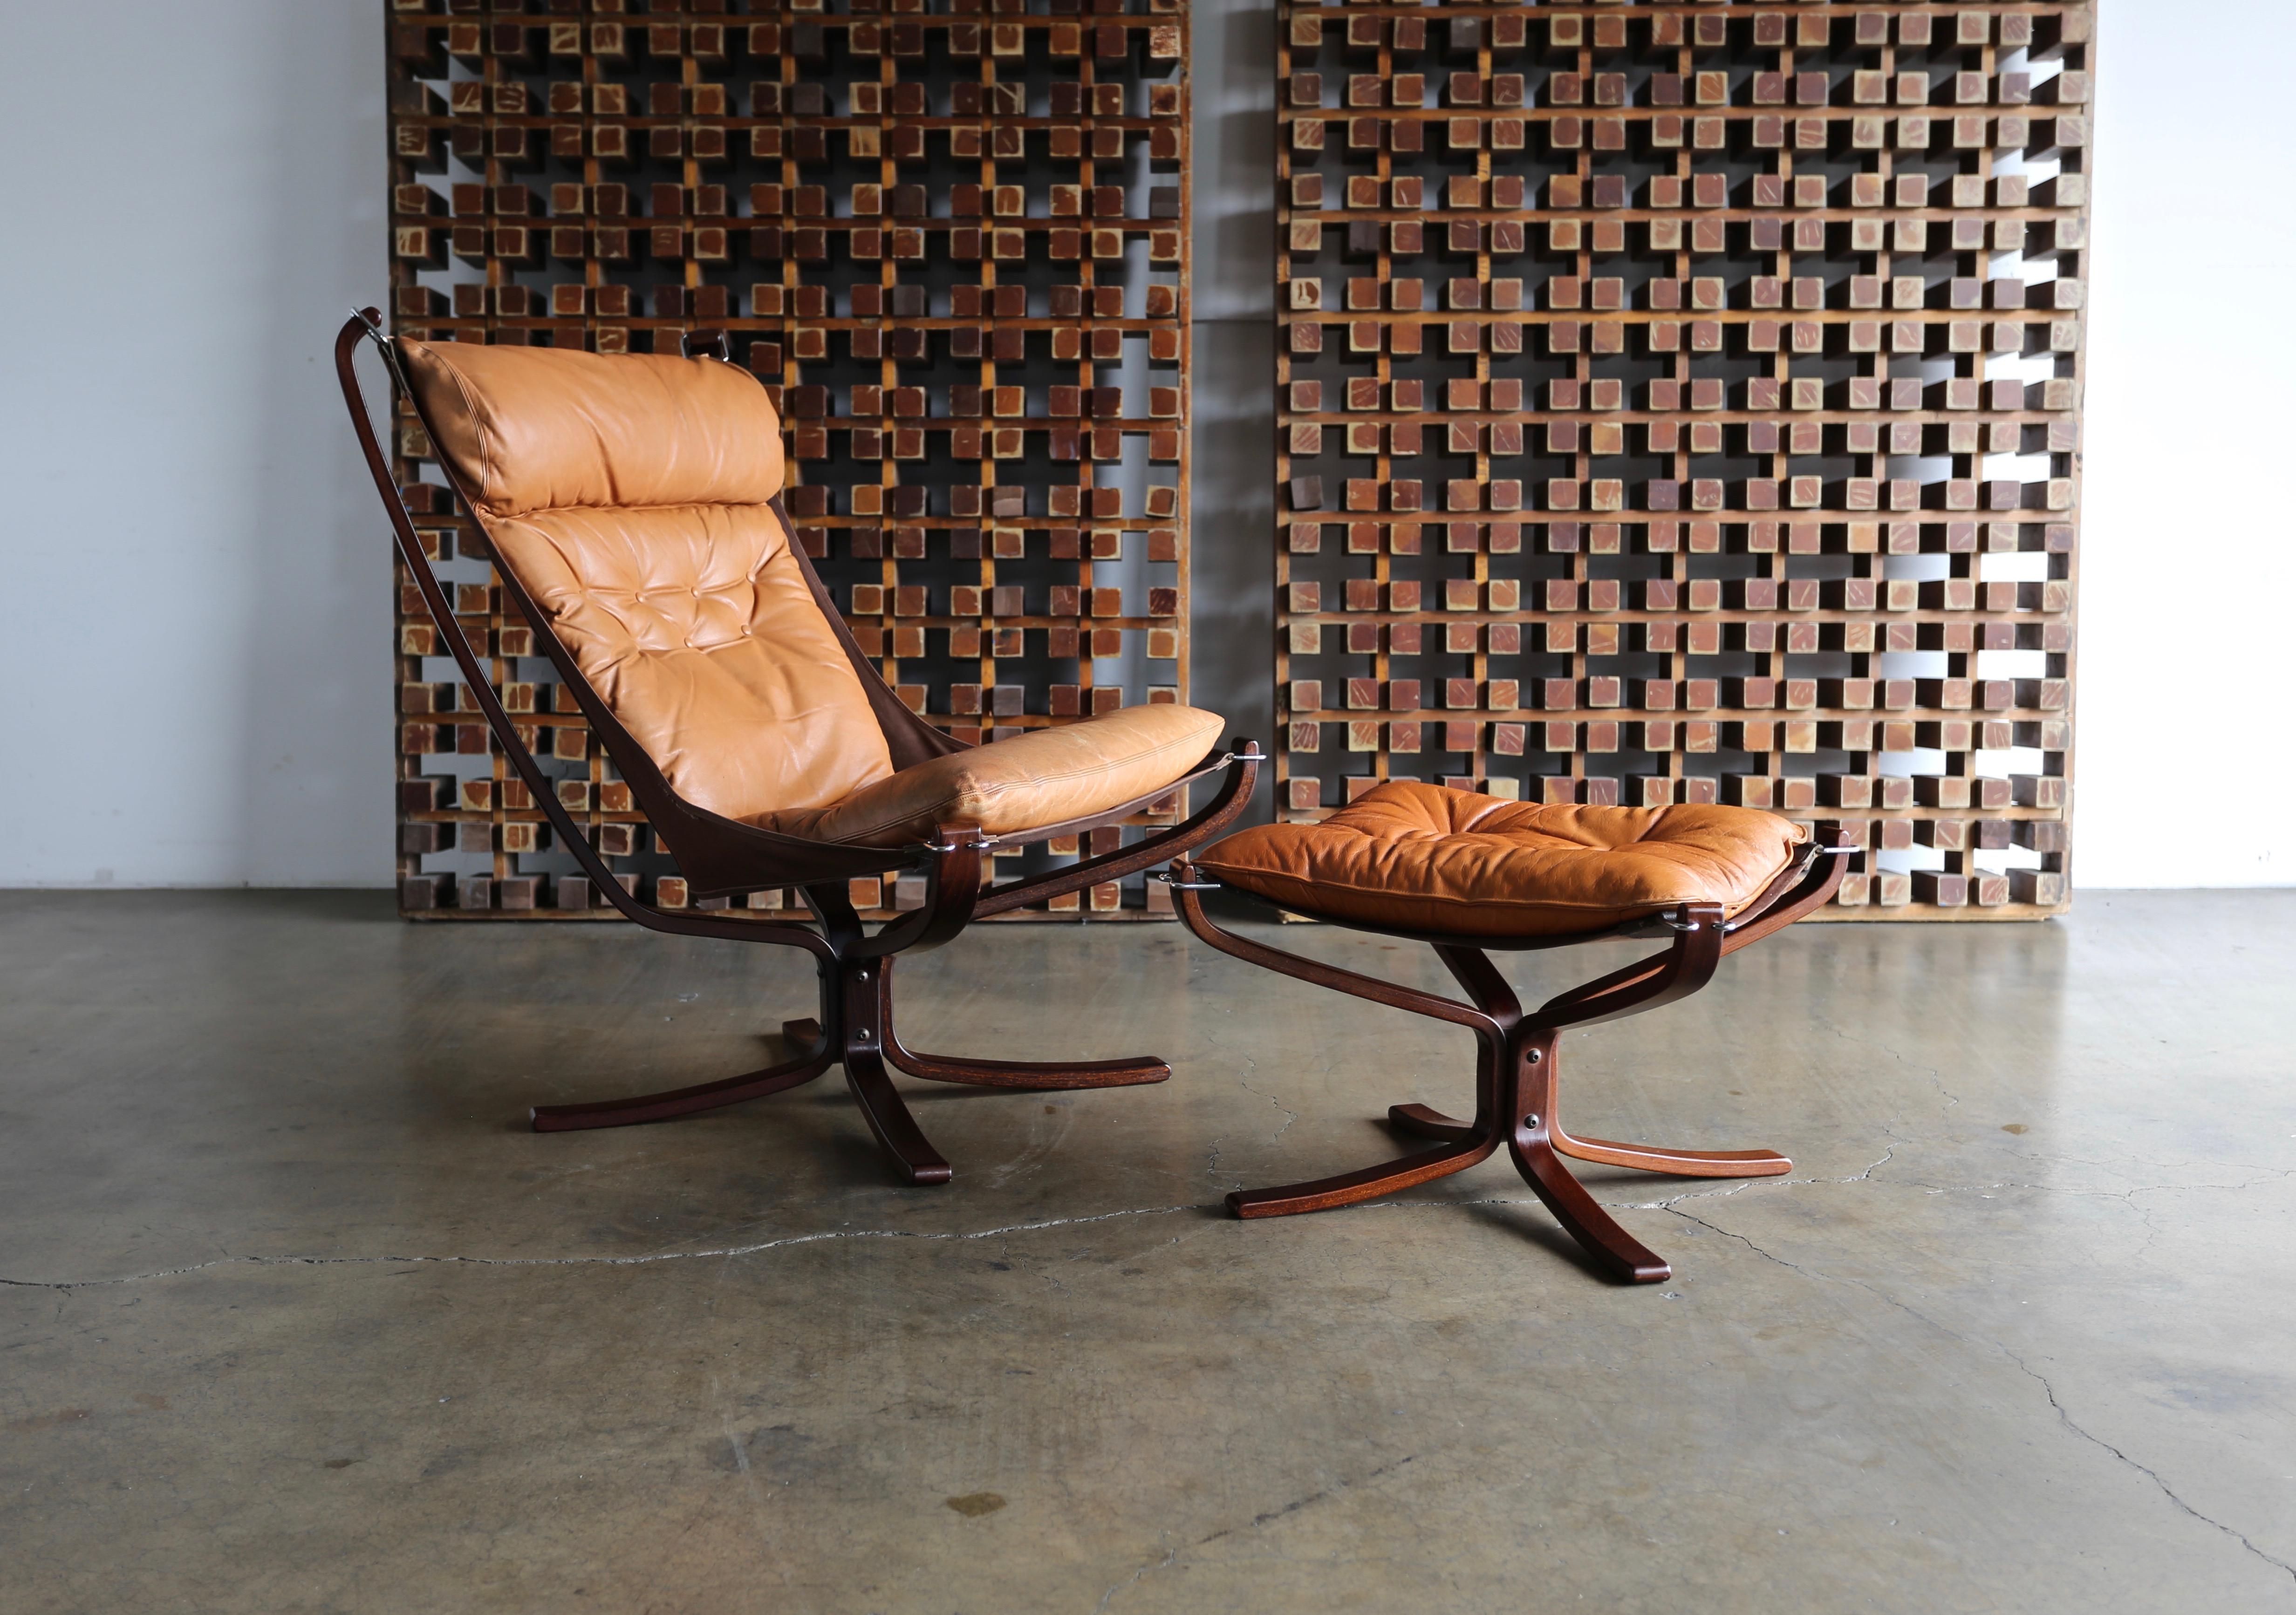 Sigurd Ressell falcon high back sling lounge chair and ottoman by Vatne Mobler, circa 1975.

The lounge chair measures 31